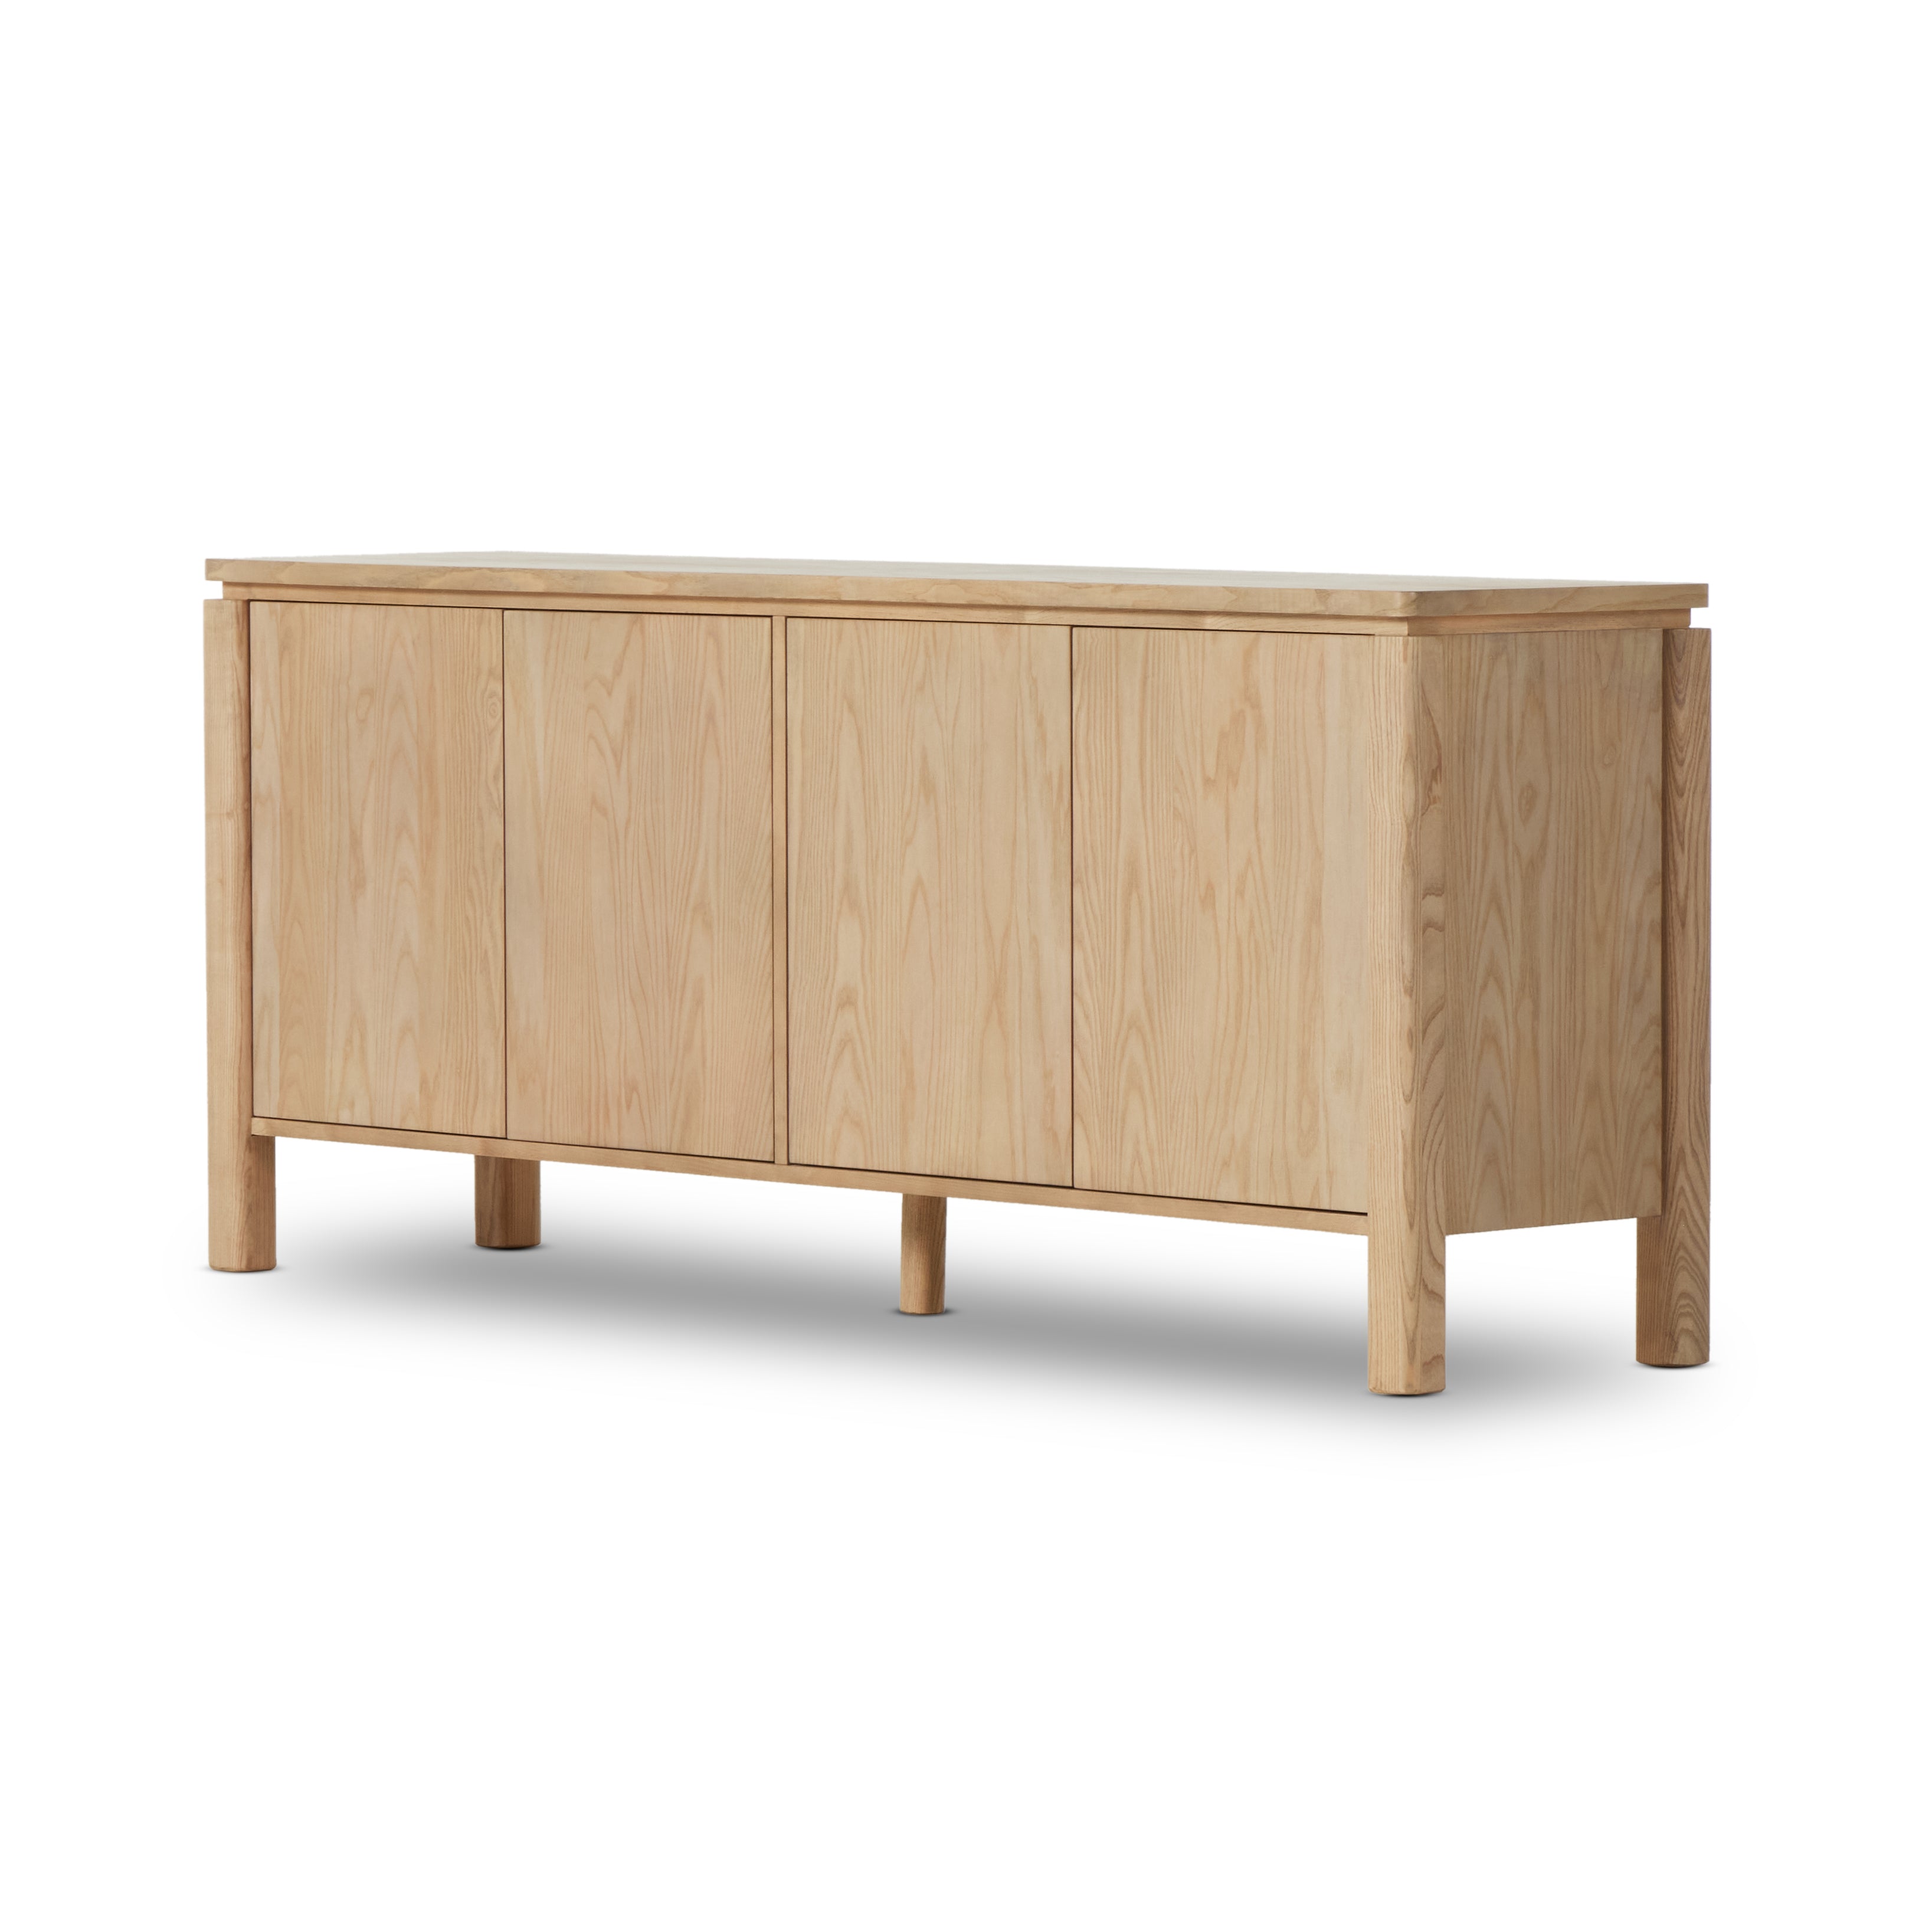 Large, rounded legs support this sleek sideboard with a reveal detail at the top. A beautiful ash finish showcases and highlights the natural wood grain. Amethyst Home provides interior design, new construction, custom furniture, and area rugs in the Des Moines metro area.